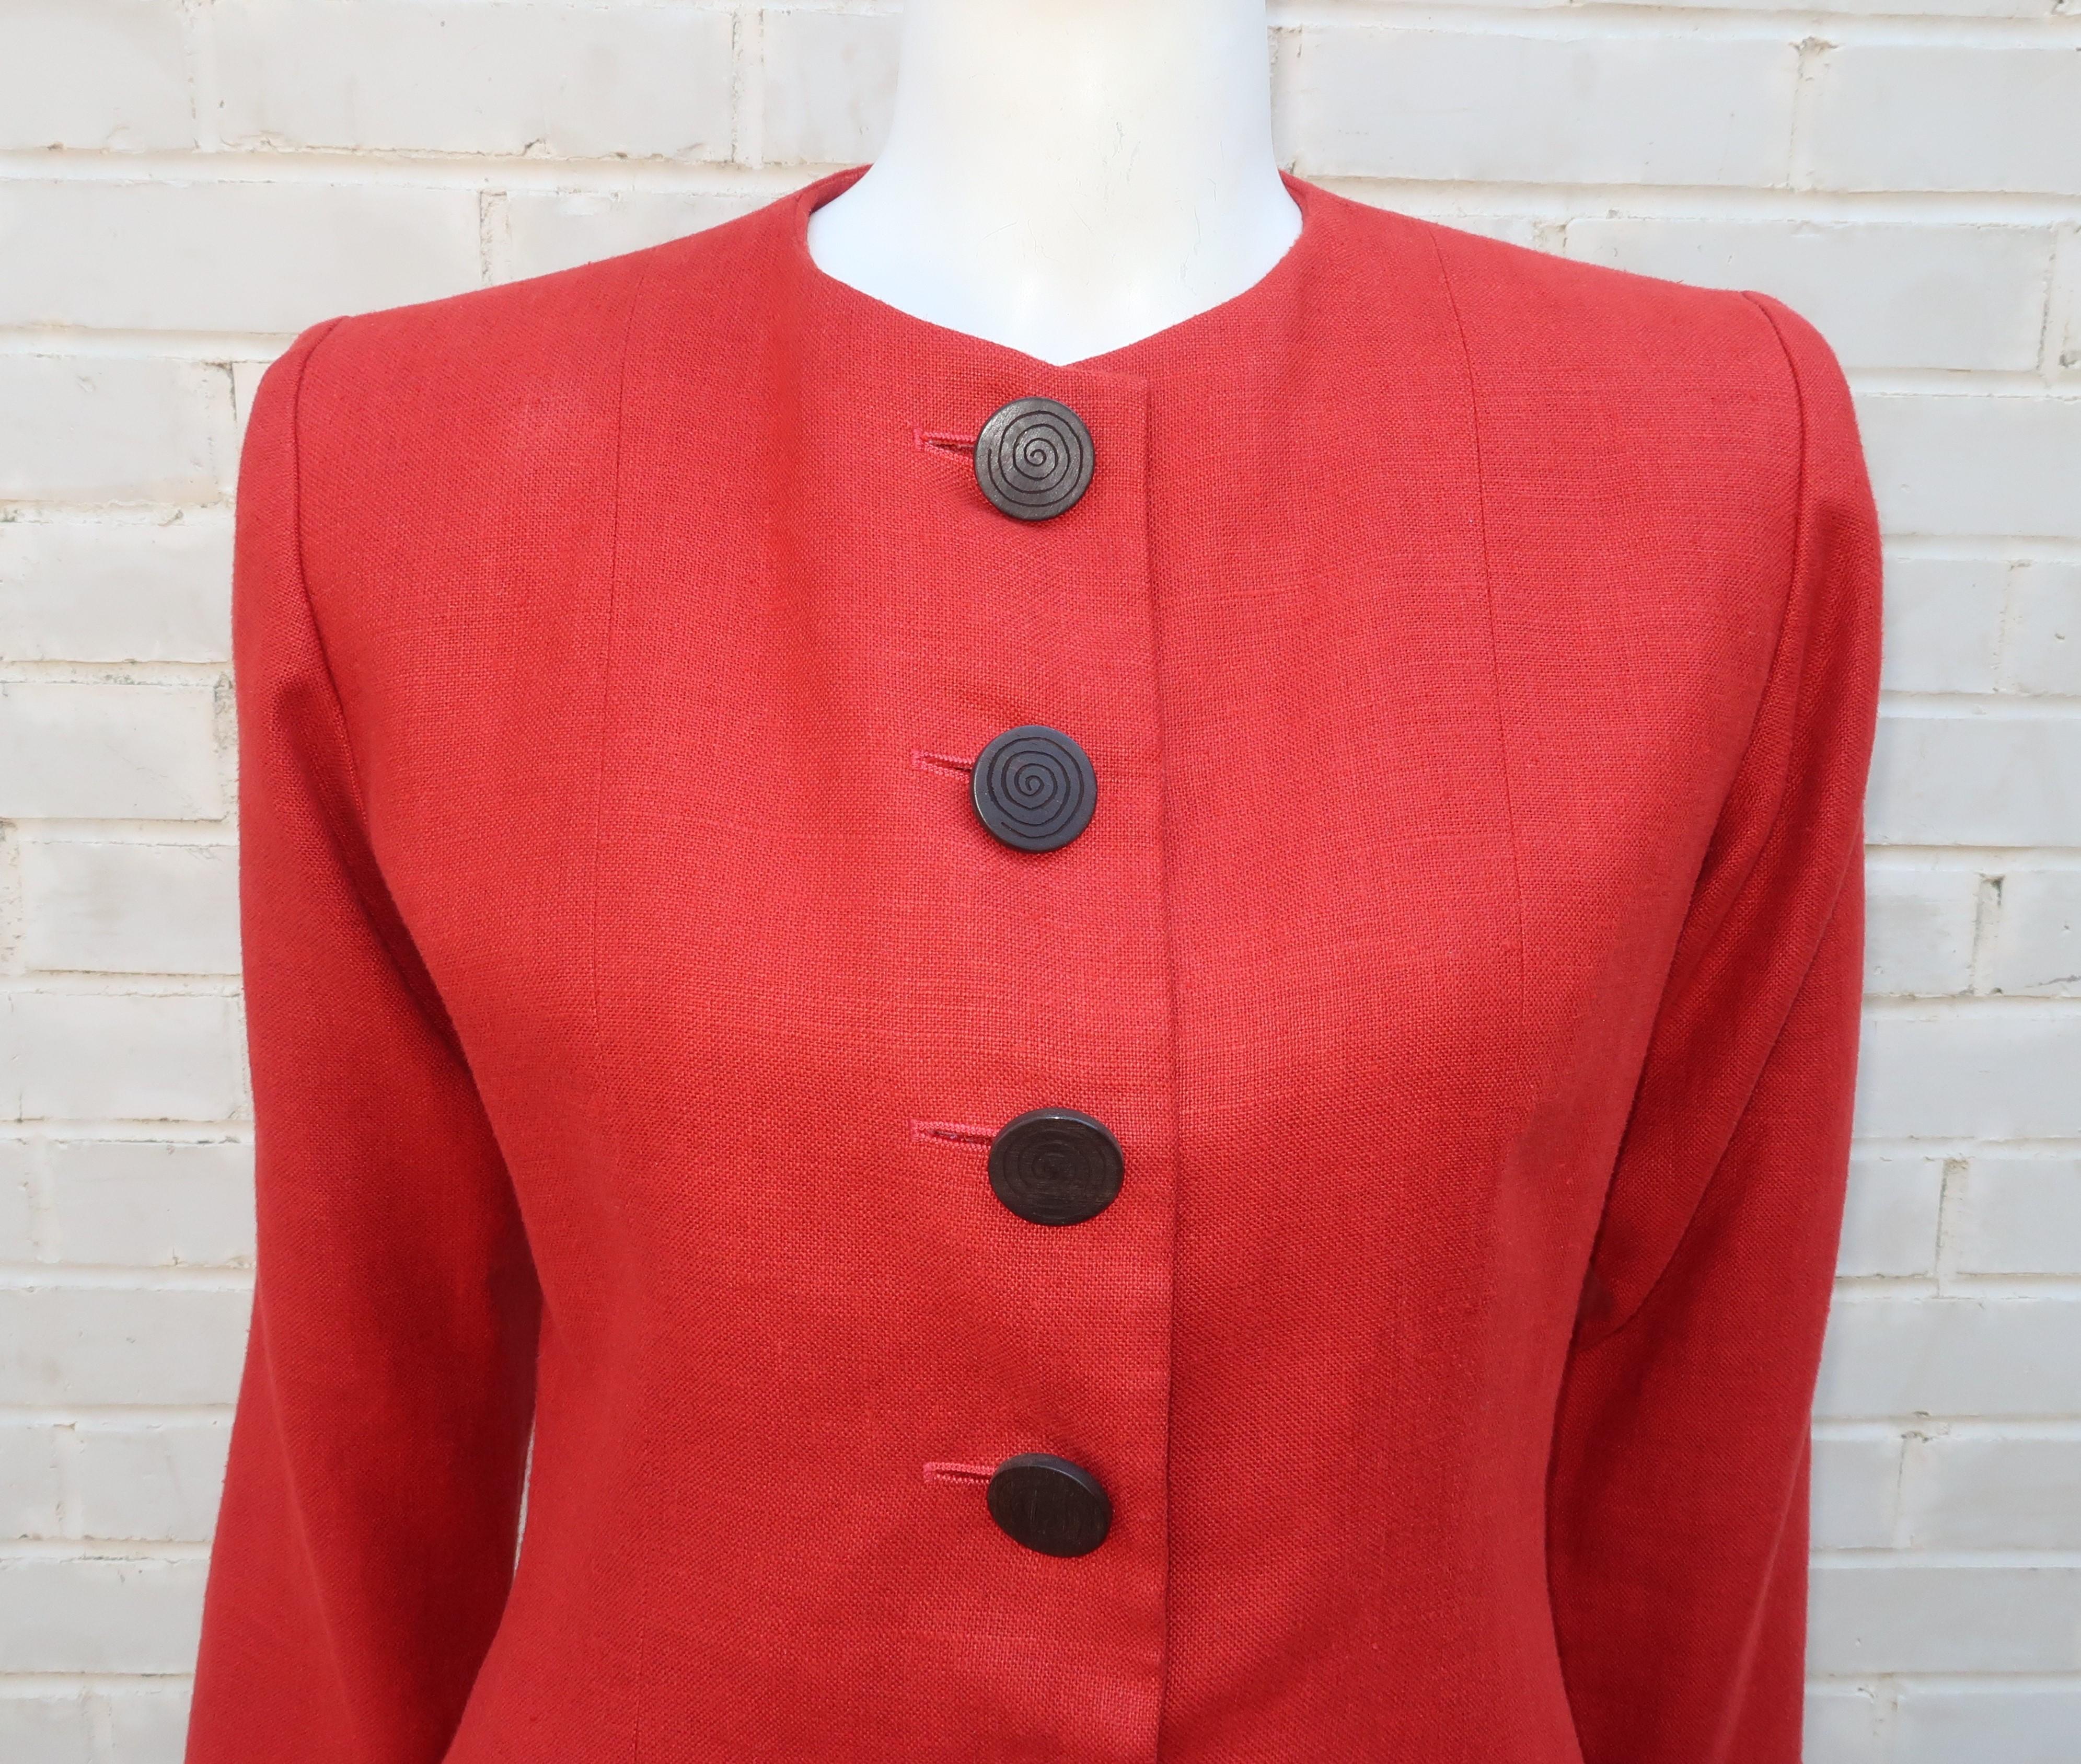 A vintage Yves Saint Laurent Rive Gauche rust orange linen collarless jacket with cutaway hemline.  The jacket closes at the front with large exotic wood buttons.  Pair it with animal or tropical prints for warm weather looks or create a safari